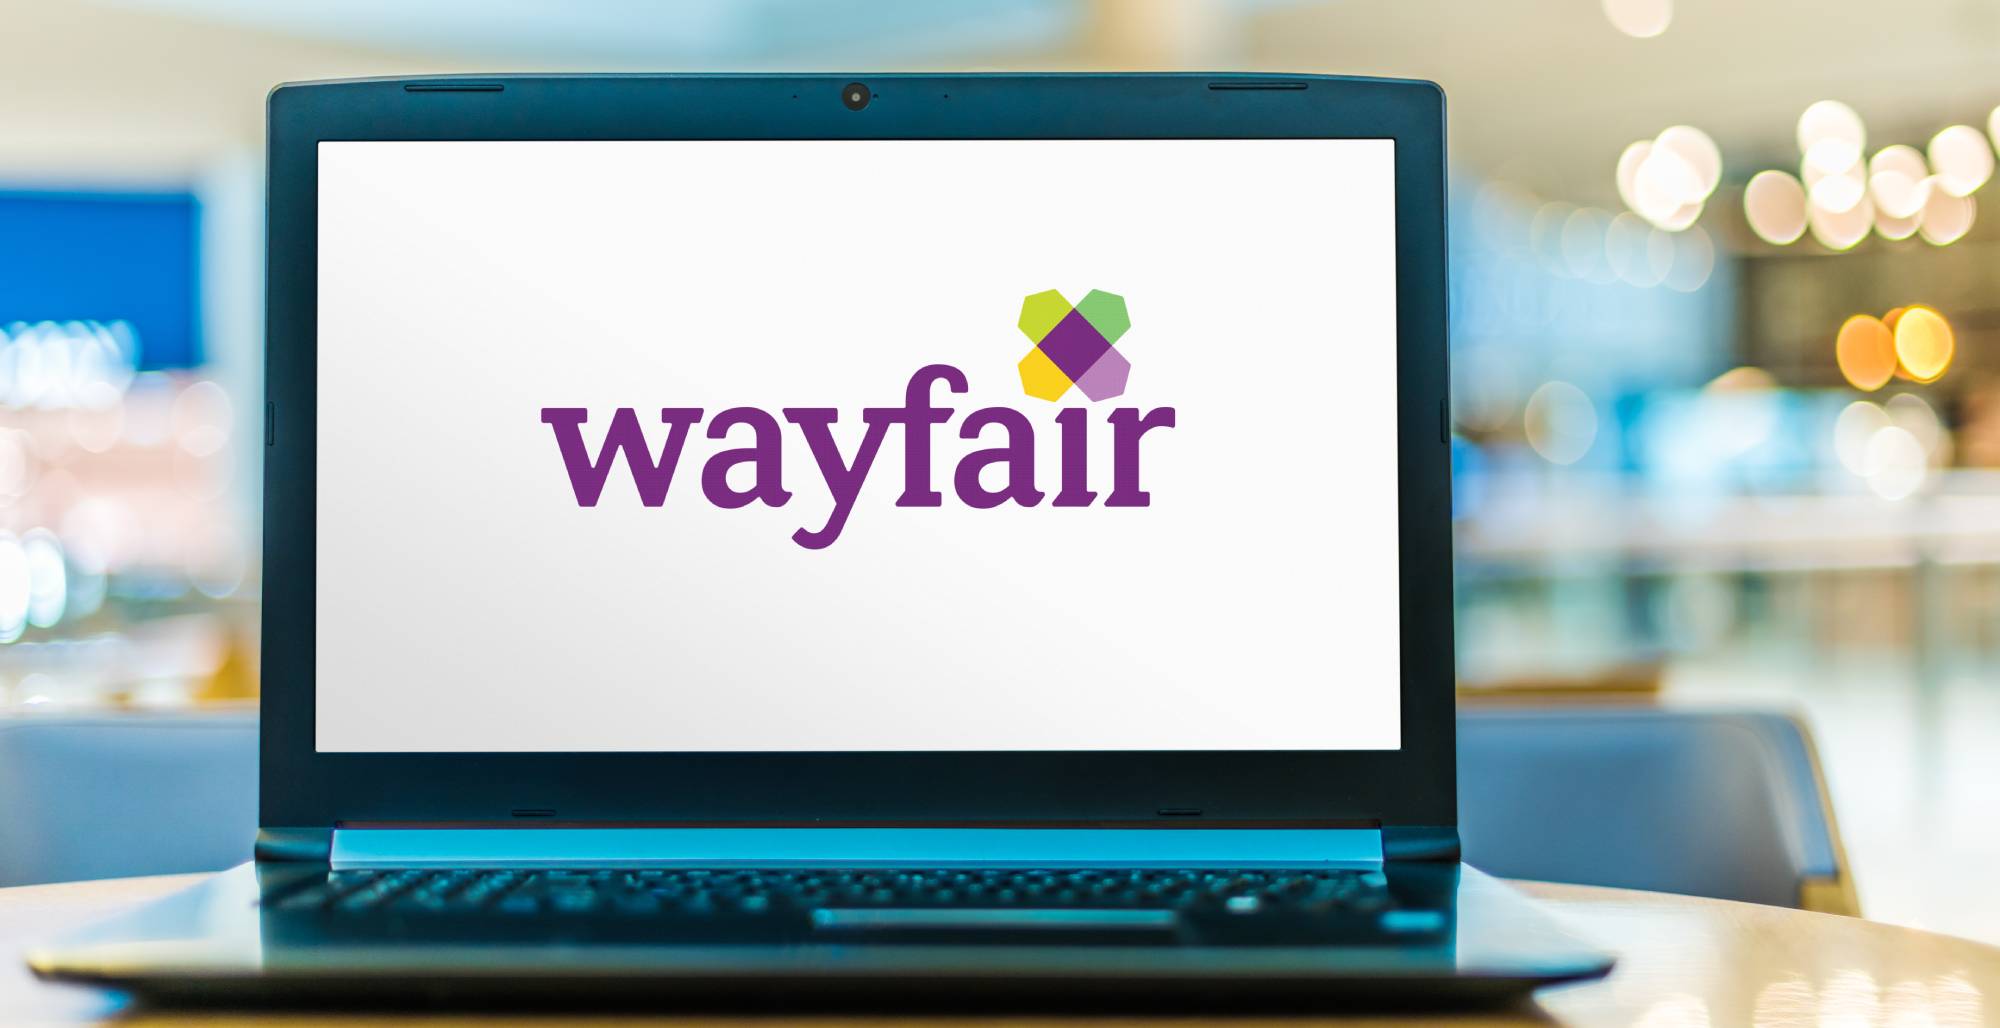 A laptop showing the wayfair website with the background blurred